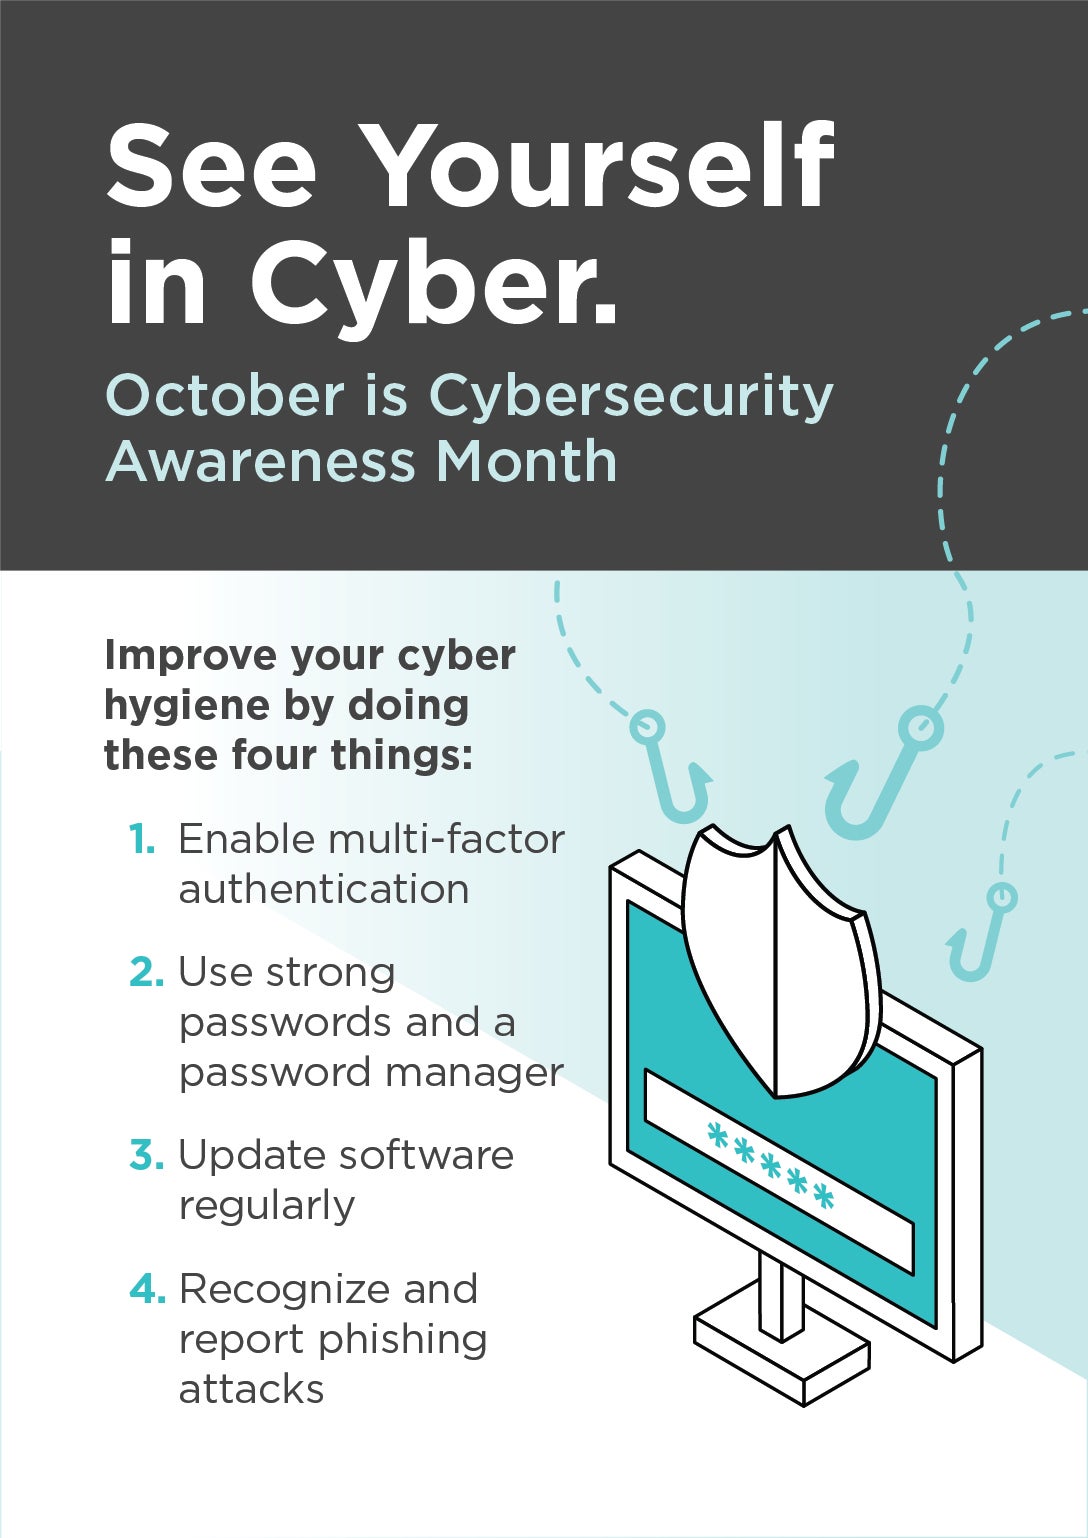 October is Cybersecurity Month